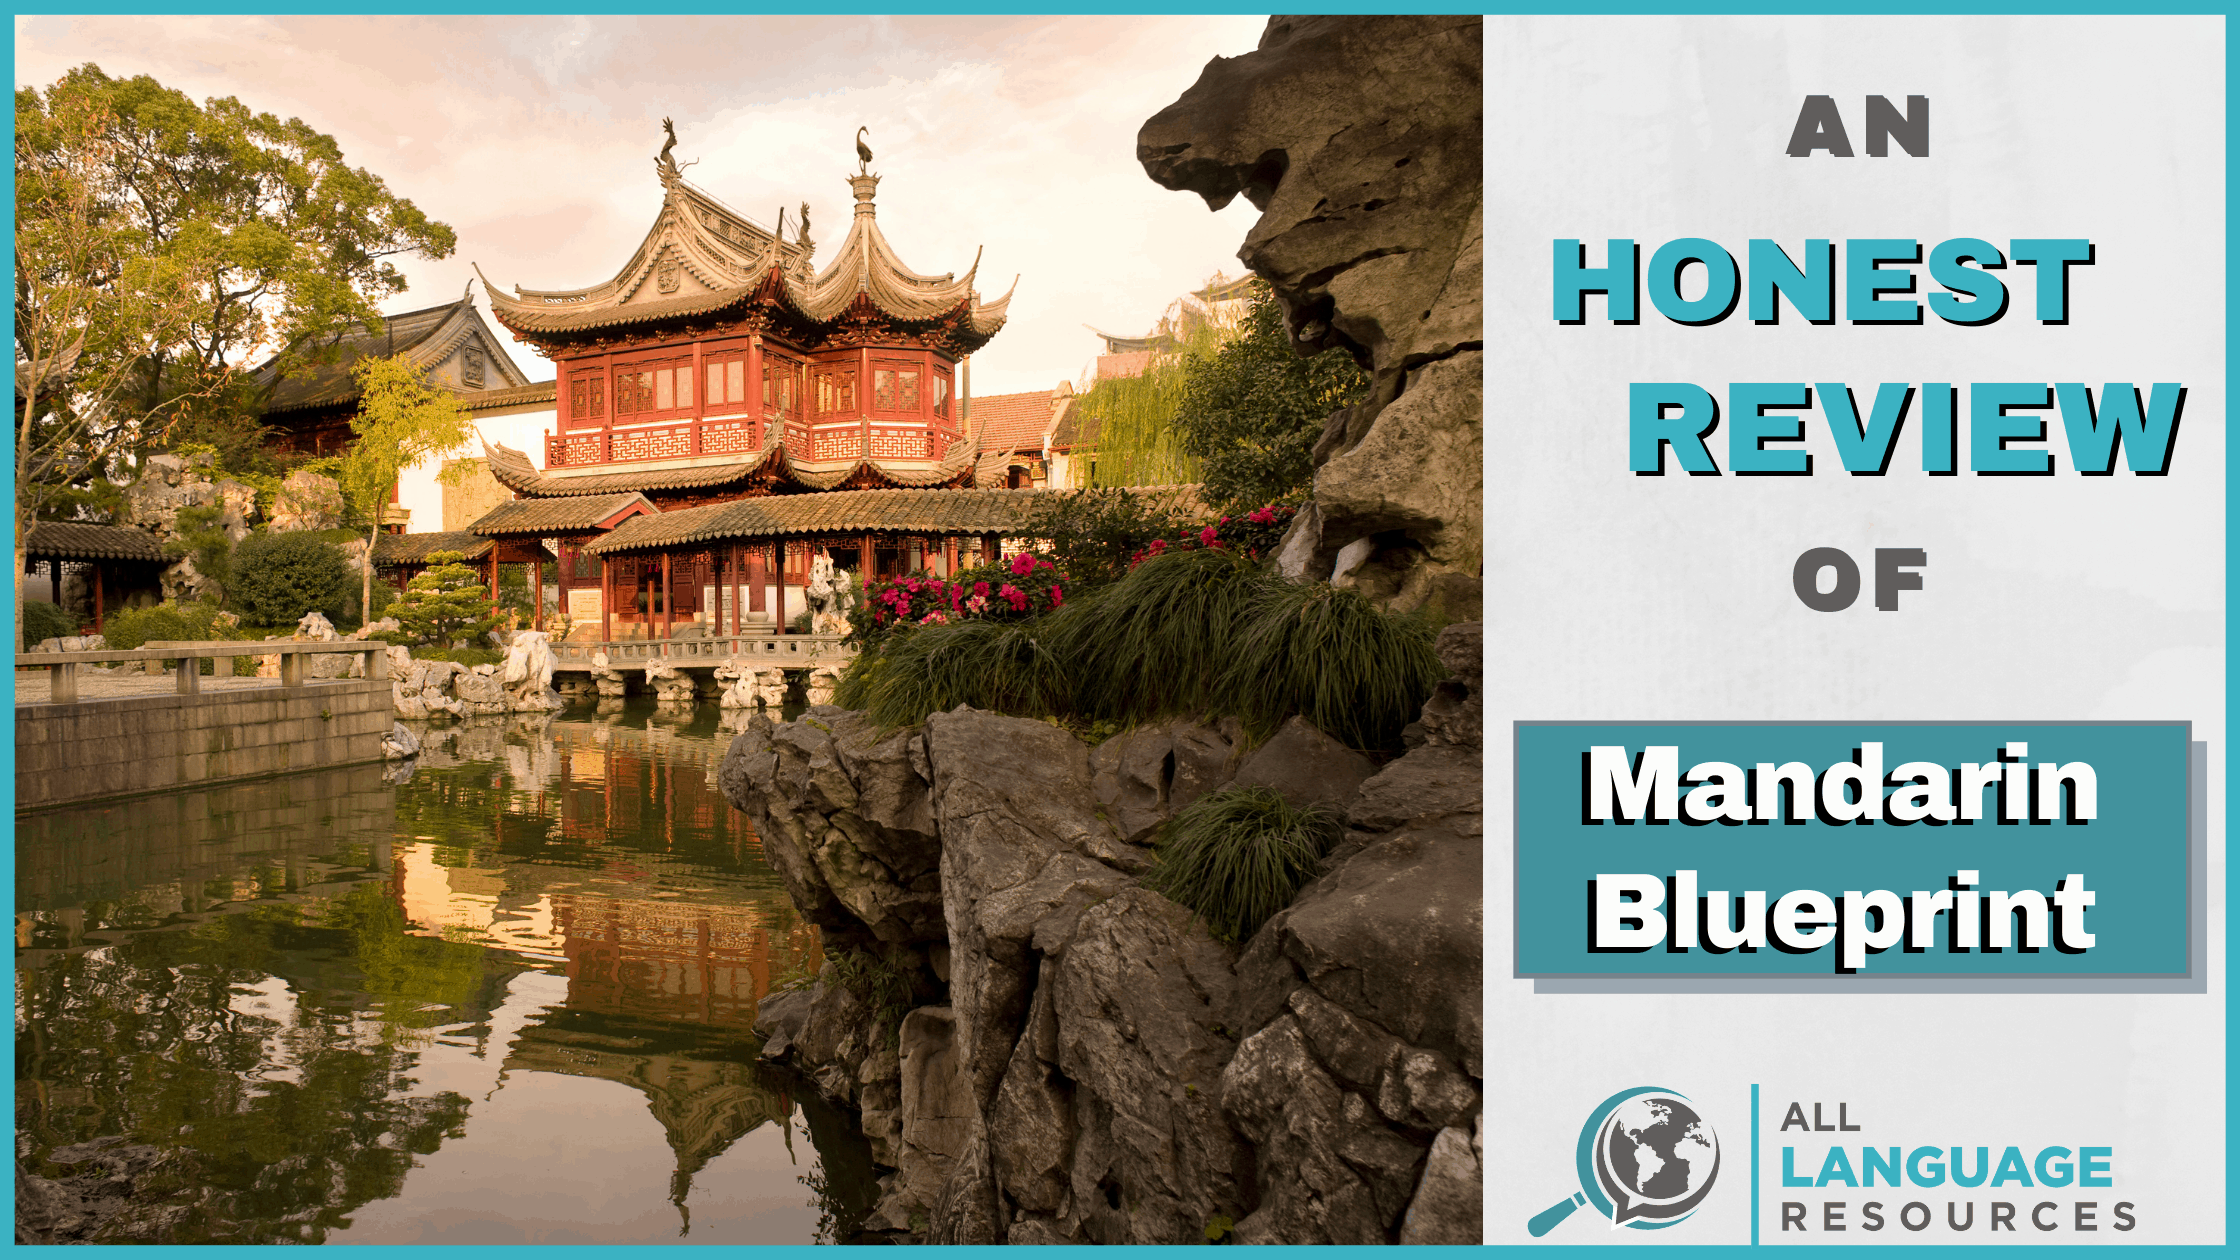 An Honest Review of Mandarin Blueprint With Image of Chinese Architecture Near River